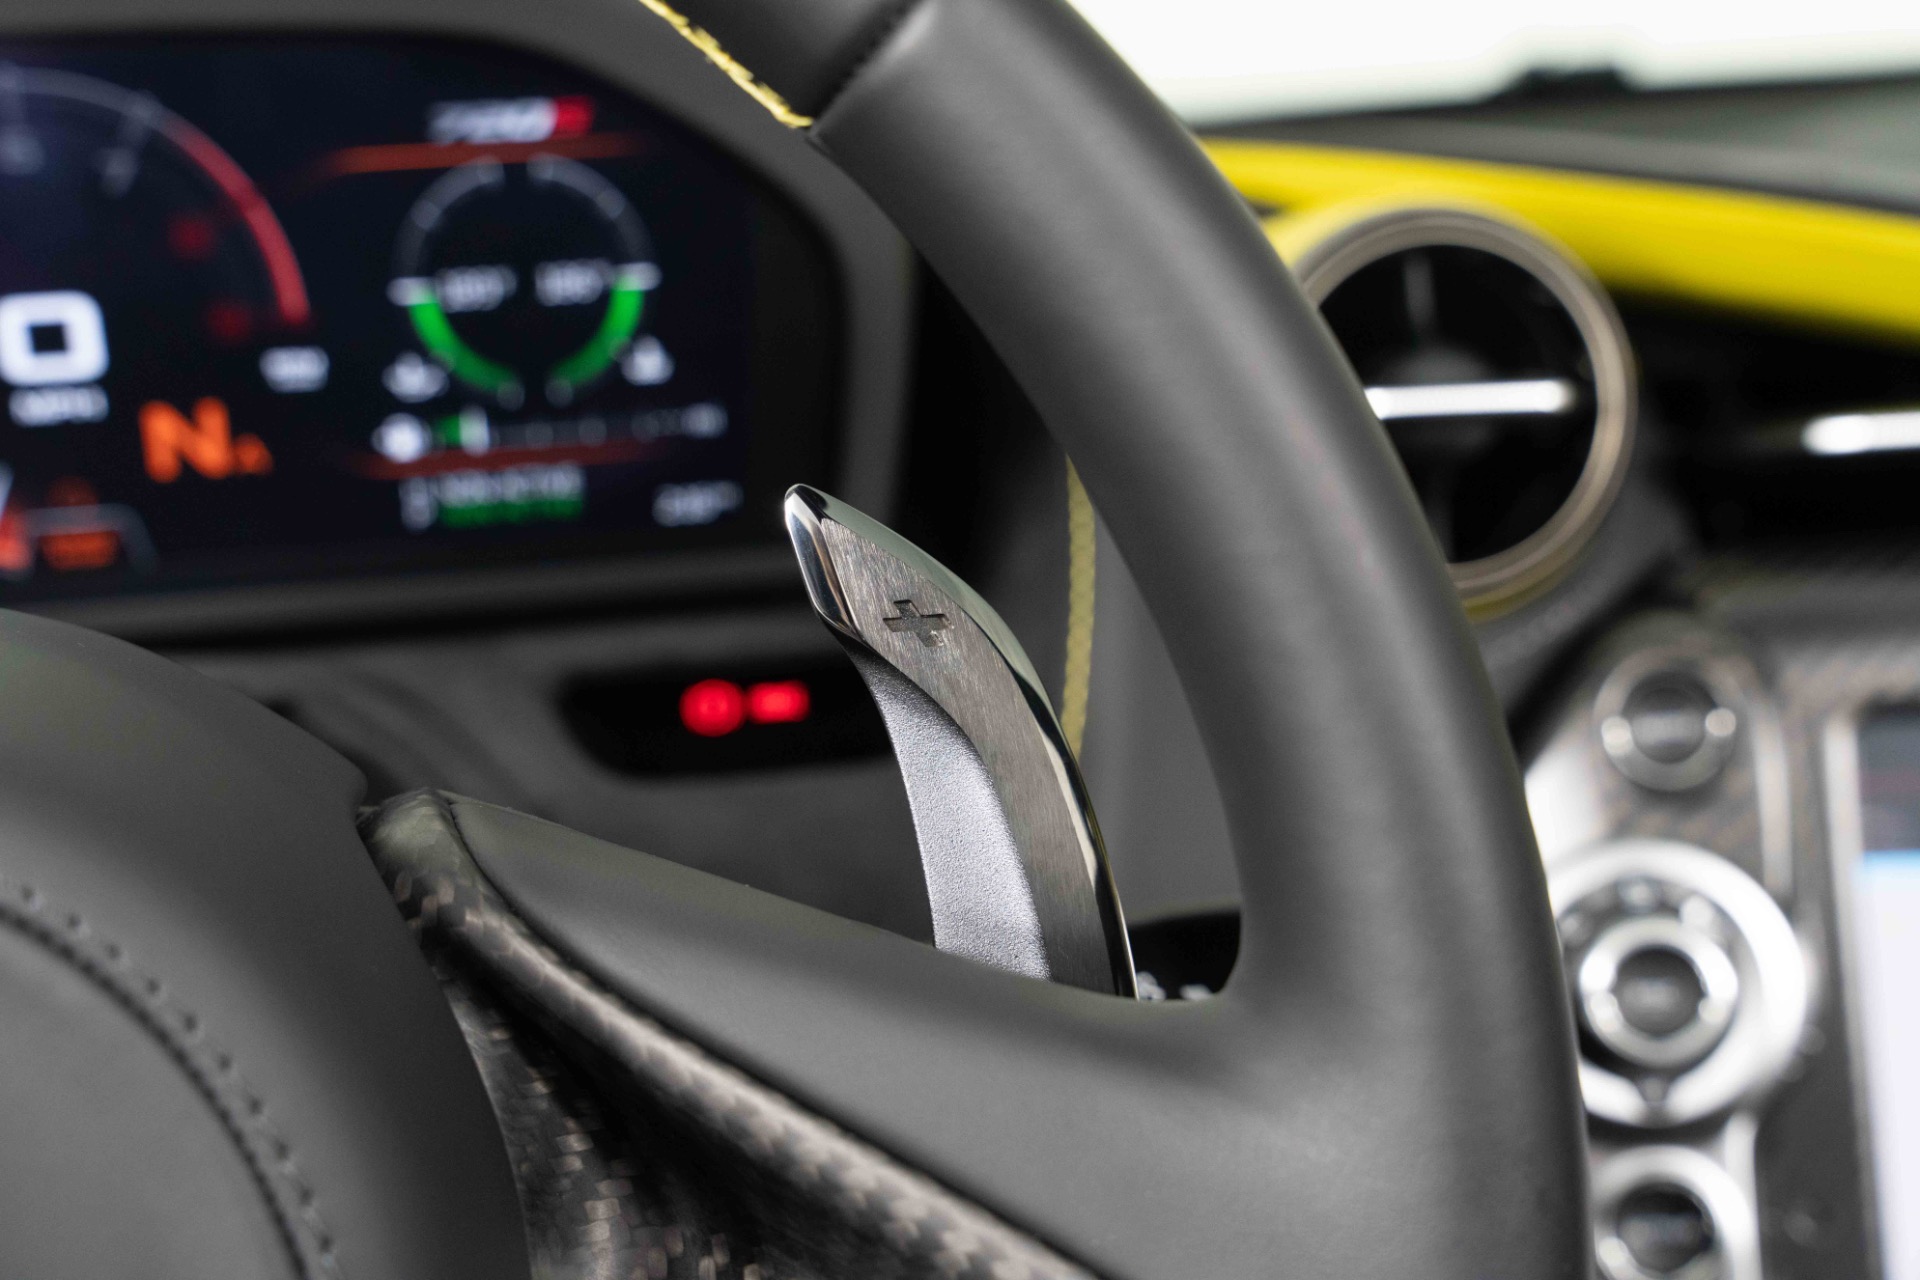 Used-2022-McLaren-720S-Spyder-LOW-MILES-Fully-Loaded-Black-Over-Yellow